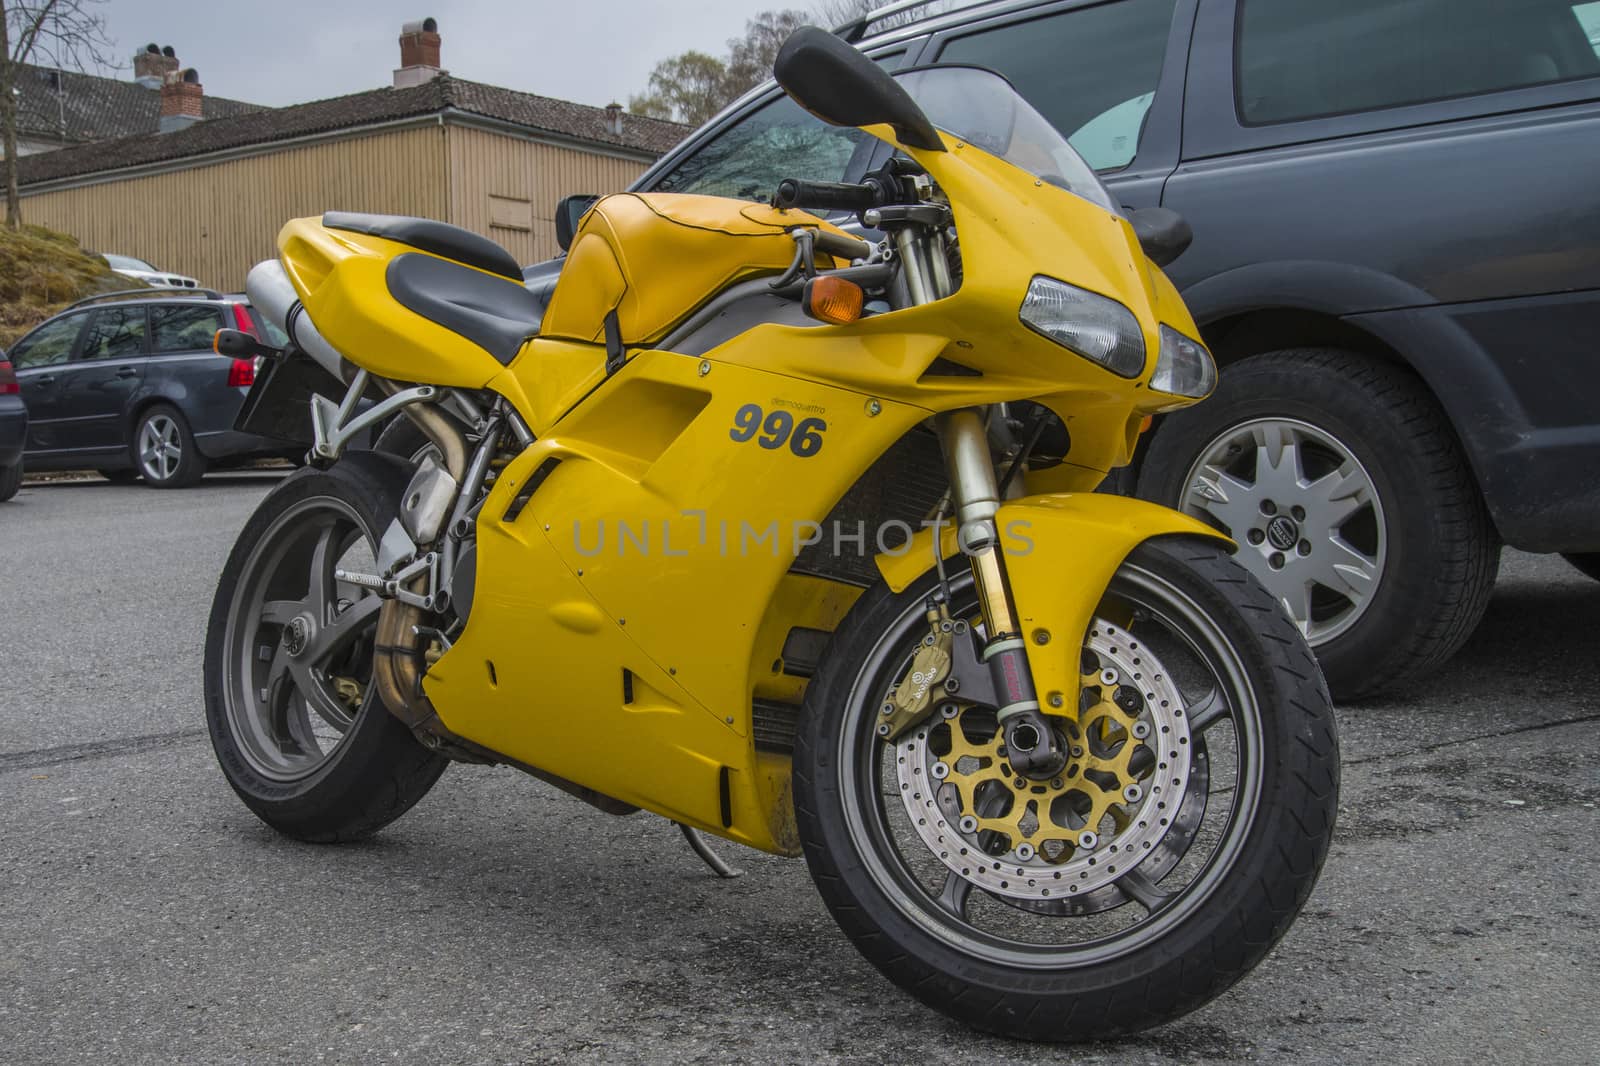 Every year in May there is a motorcycle meeting at Fredriksten fortress in Halden, Norway. In this photo, Ducati Desmoquattro 996 which is a water-cooled, four-valve engines from Ducati.